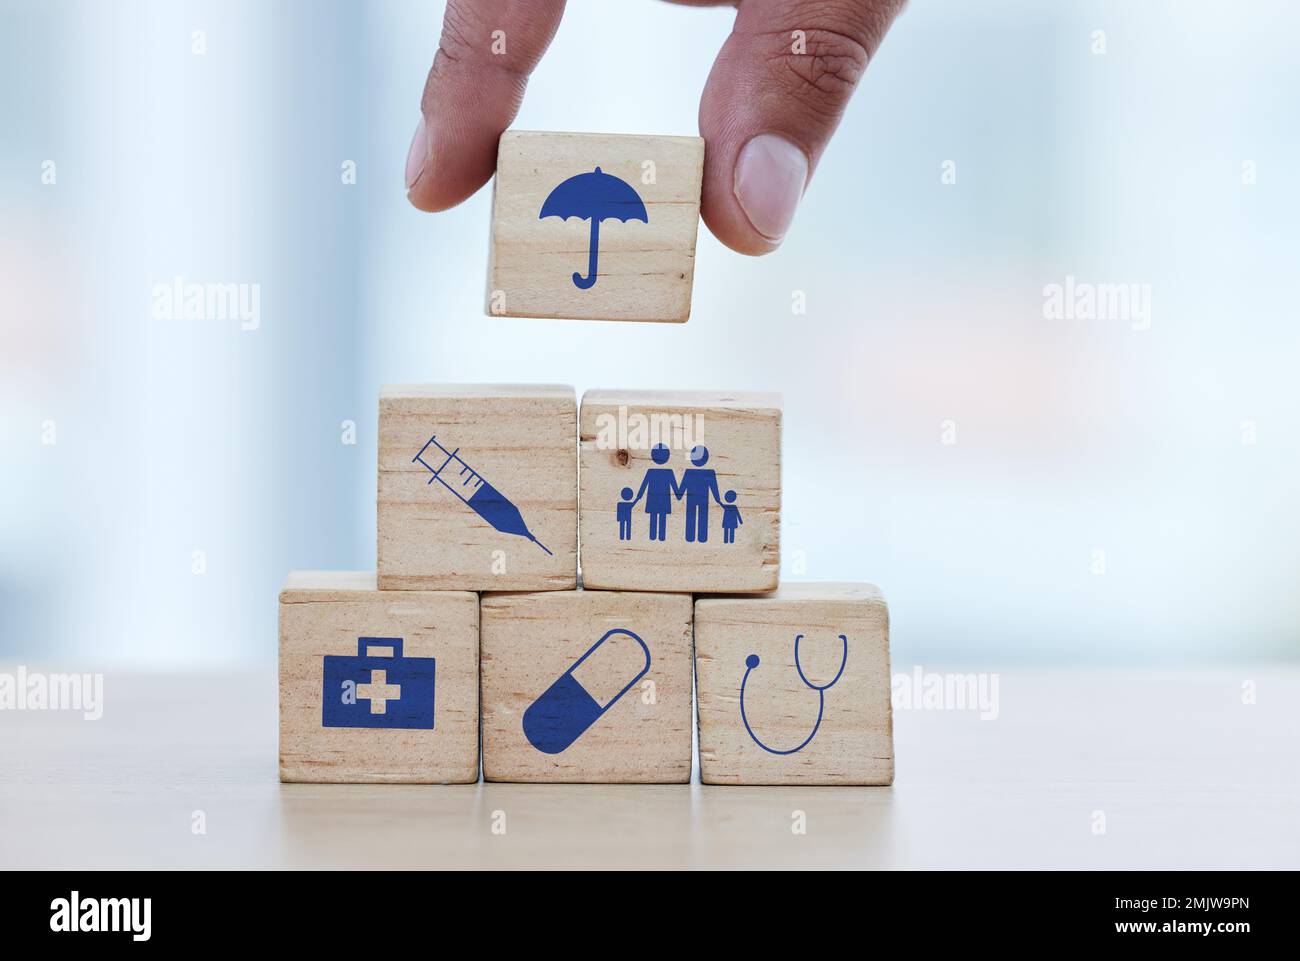 Hands, wood and building blocks on table for insurance, healthcare or a safe healthy foundation. Hand of doctor putting small wooden block, object or Stock Photo